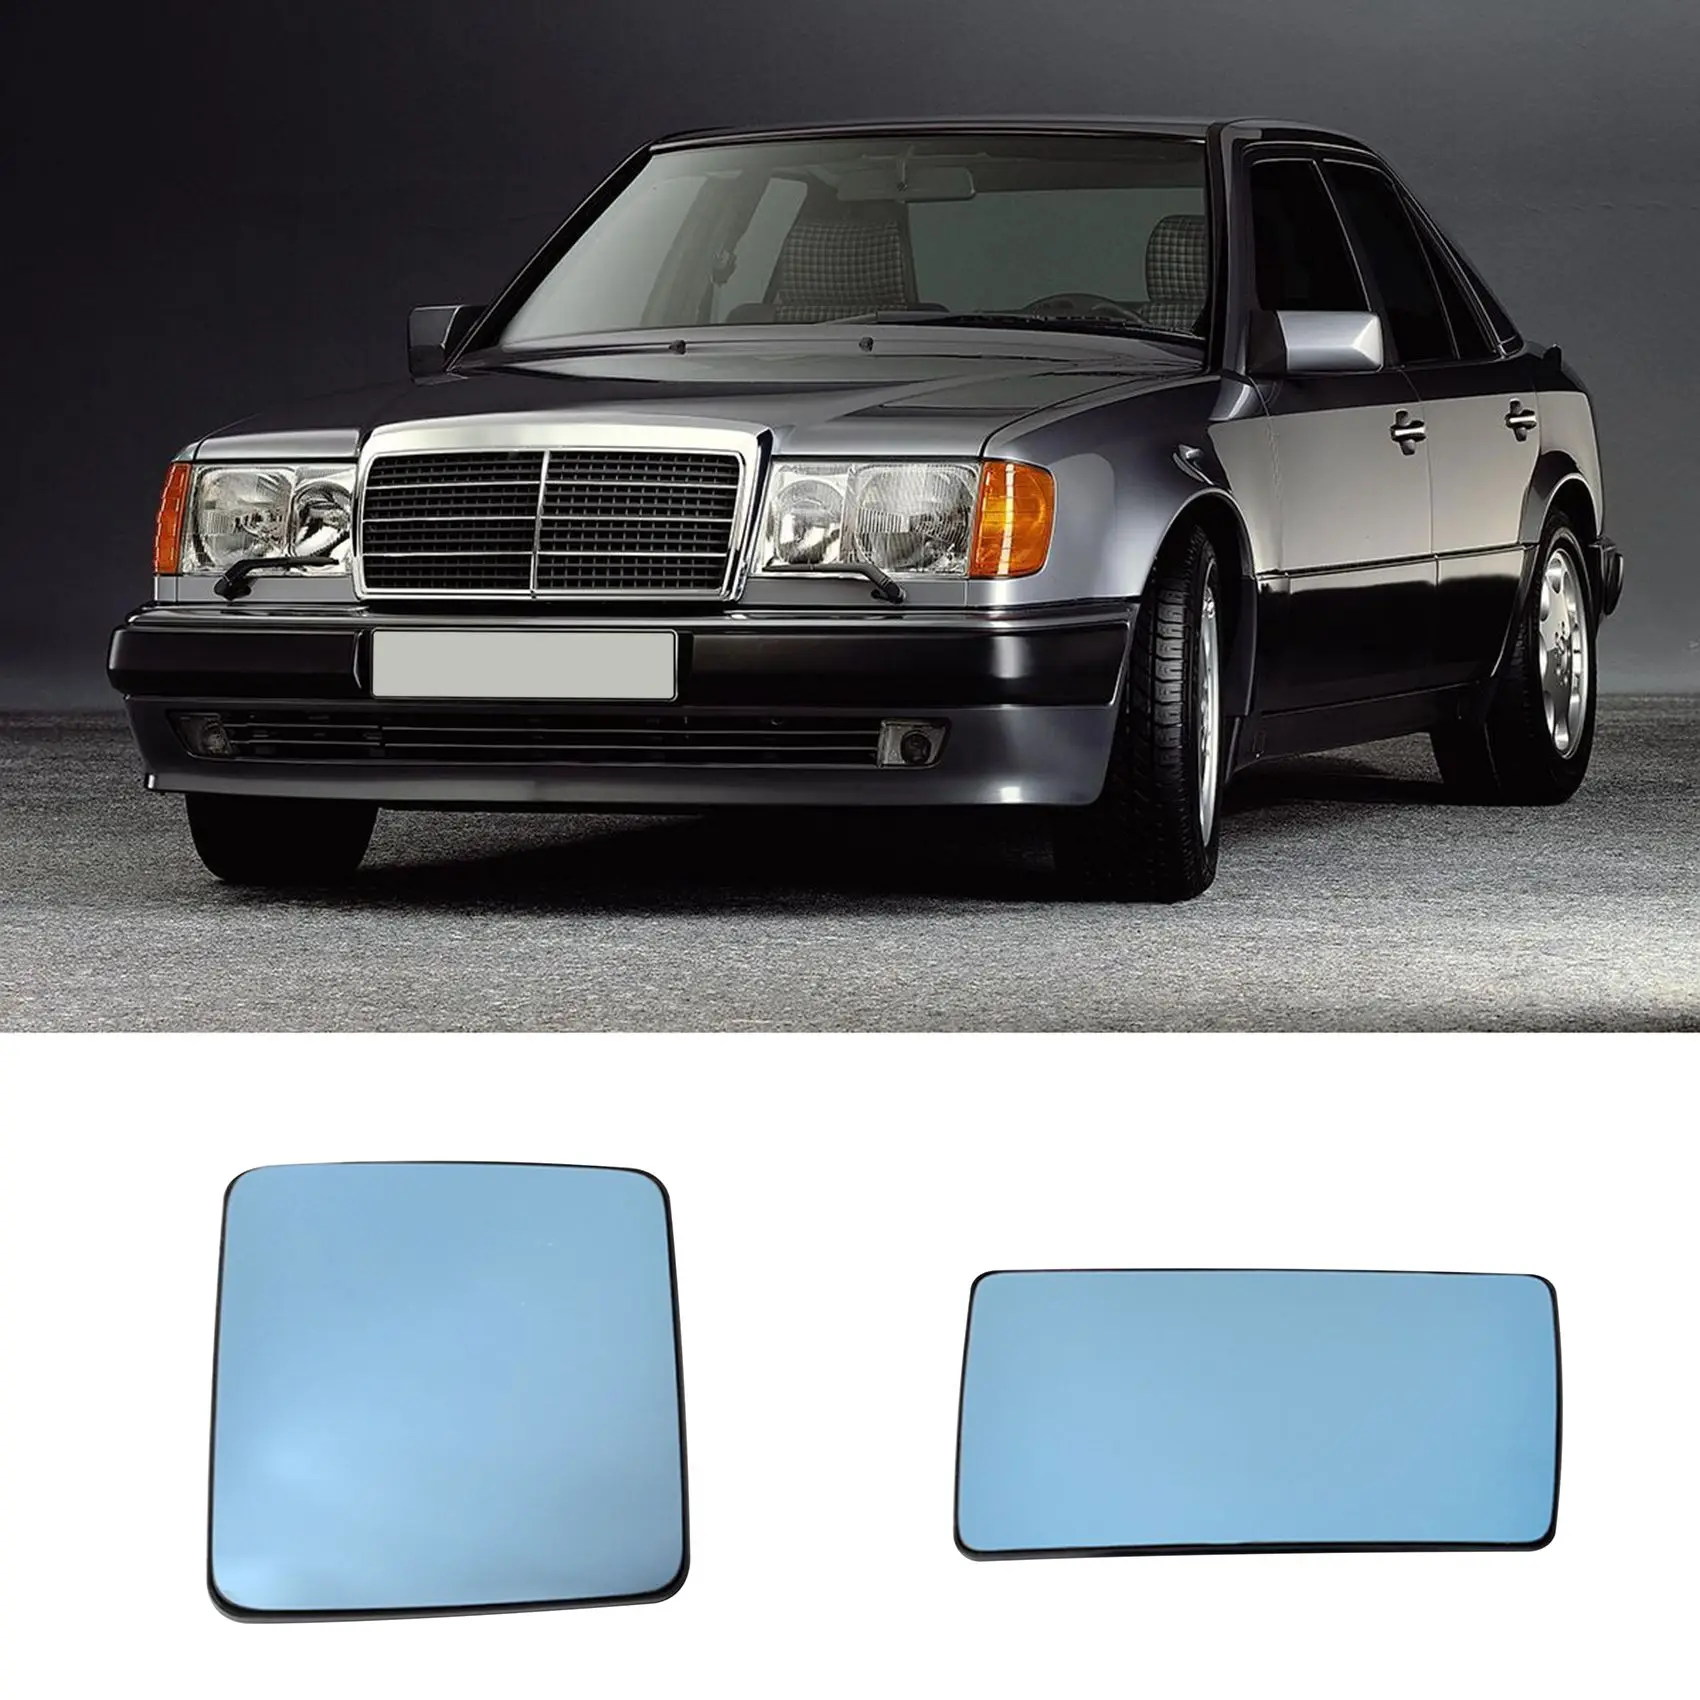 Car Blue Mirror Glass for Mercedes Benz W124 S124 W201 190 (1985-1993) E (1993-1995) Heated Glass Rearview Mirror Right